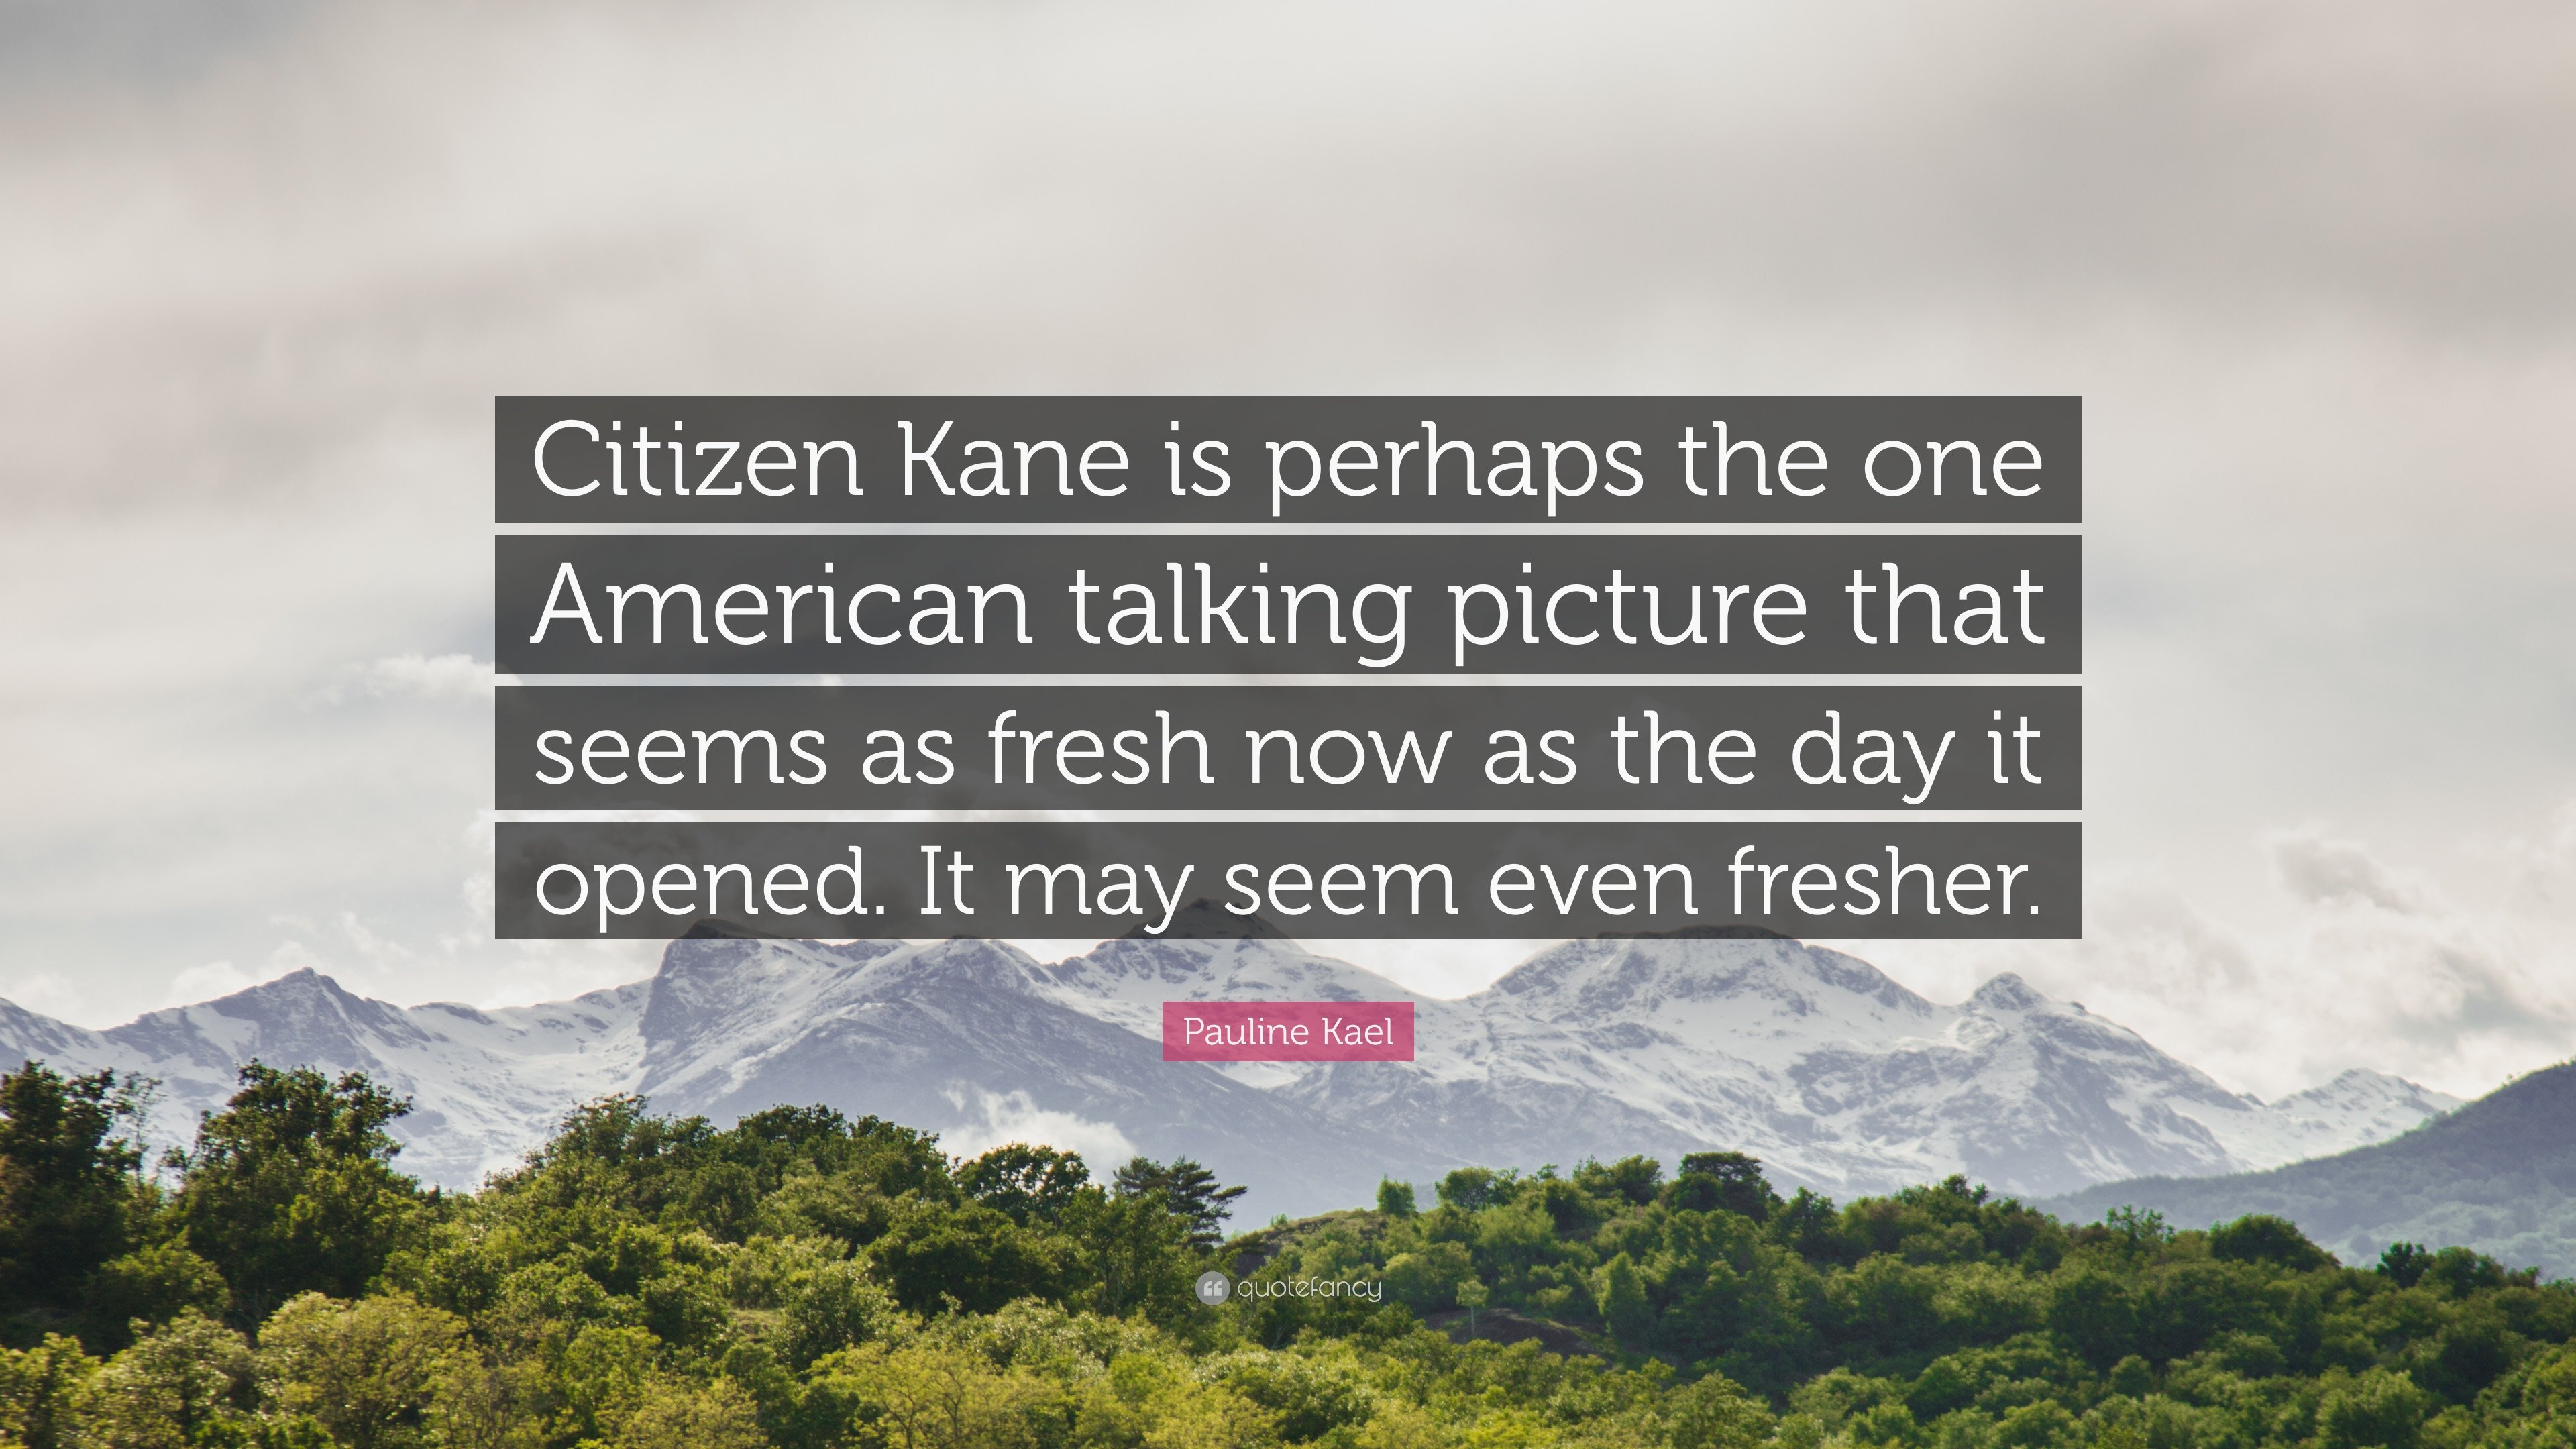 Pauline Kael Quote: “Citizen Kane is perhaps the one American